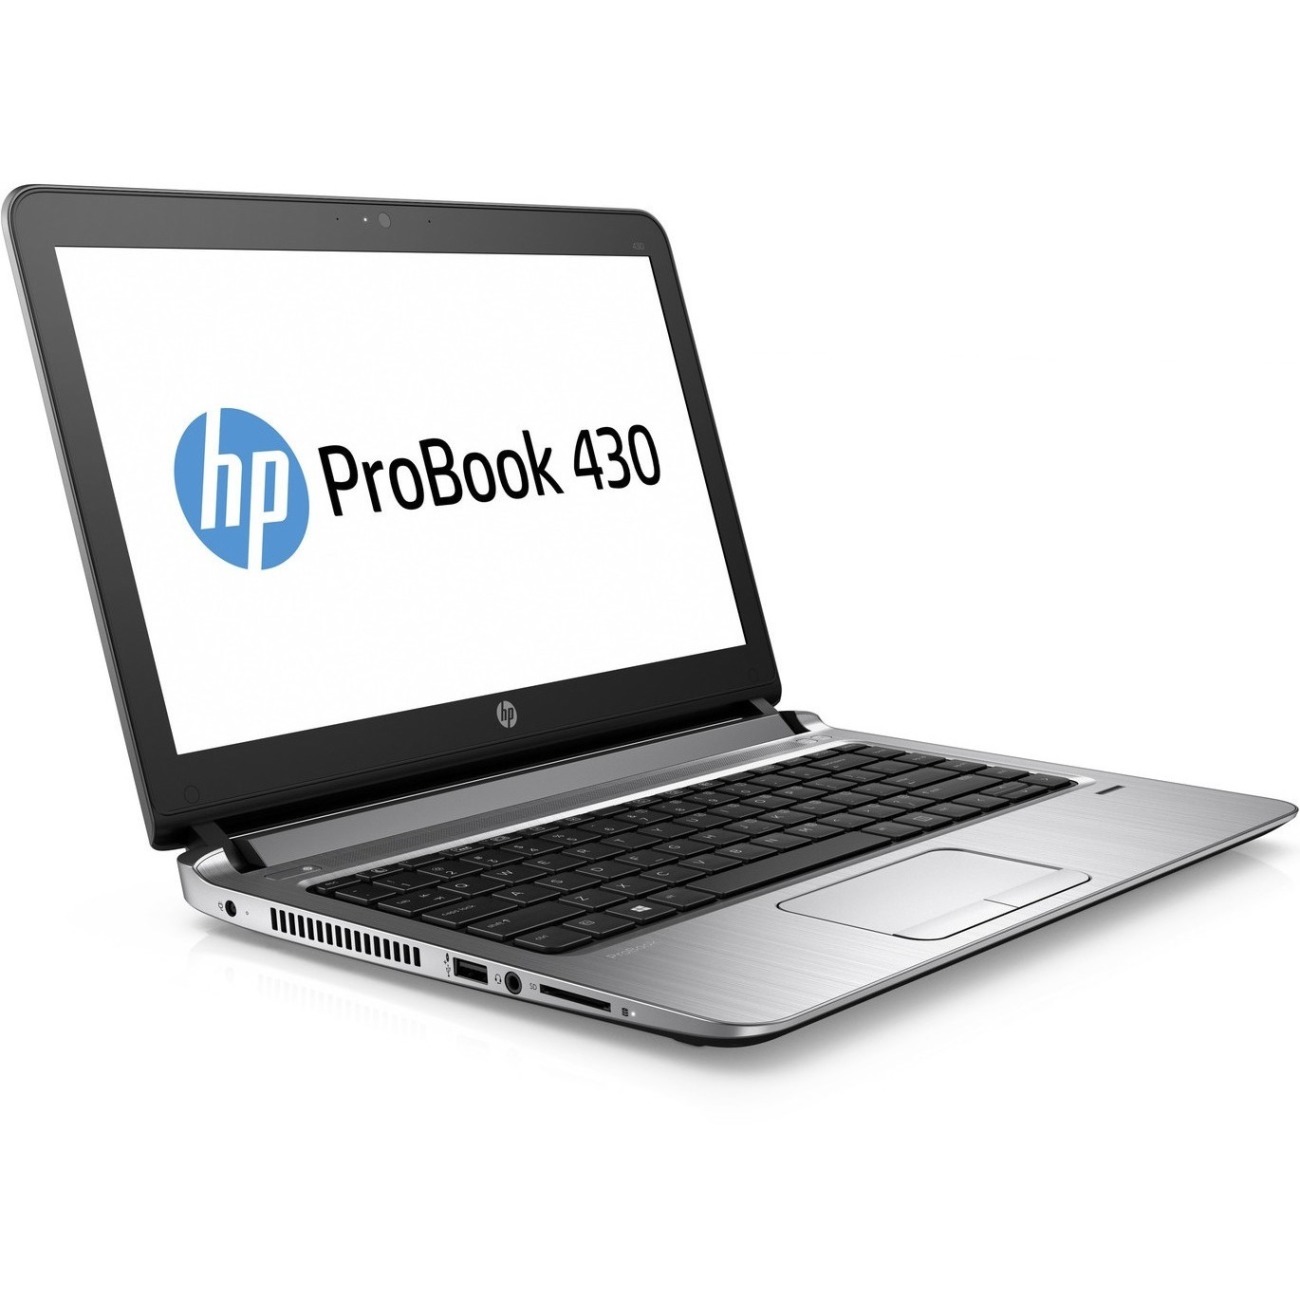 ProBook 430 G3 Notebook PC (ENERGY STAR) - image 1 of 7